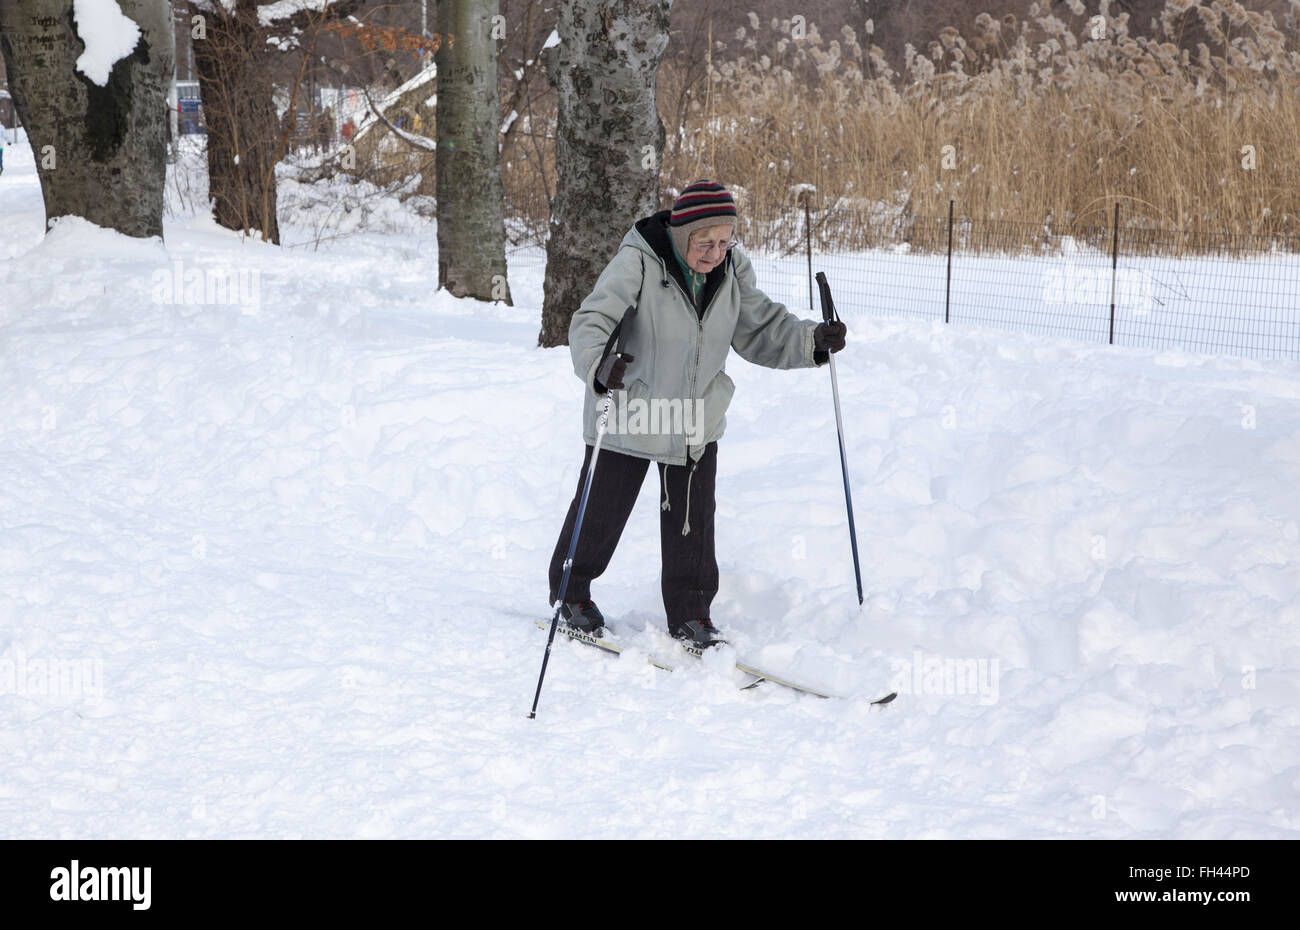 Older woman, still cross country skiing after a big snow storm. Prospect Park, Brooklyn, NY. Stock Photo